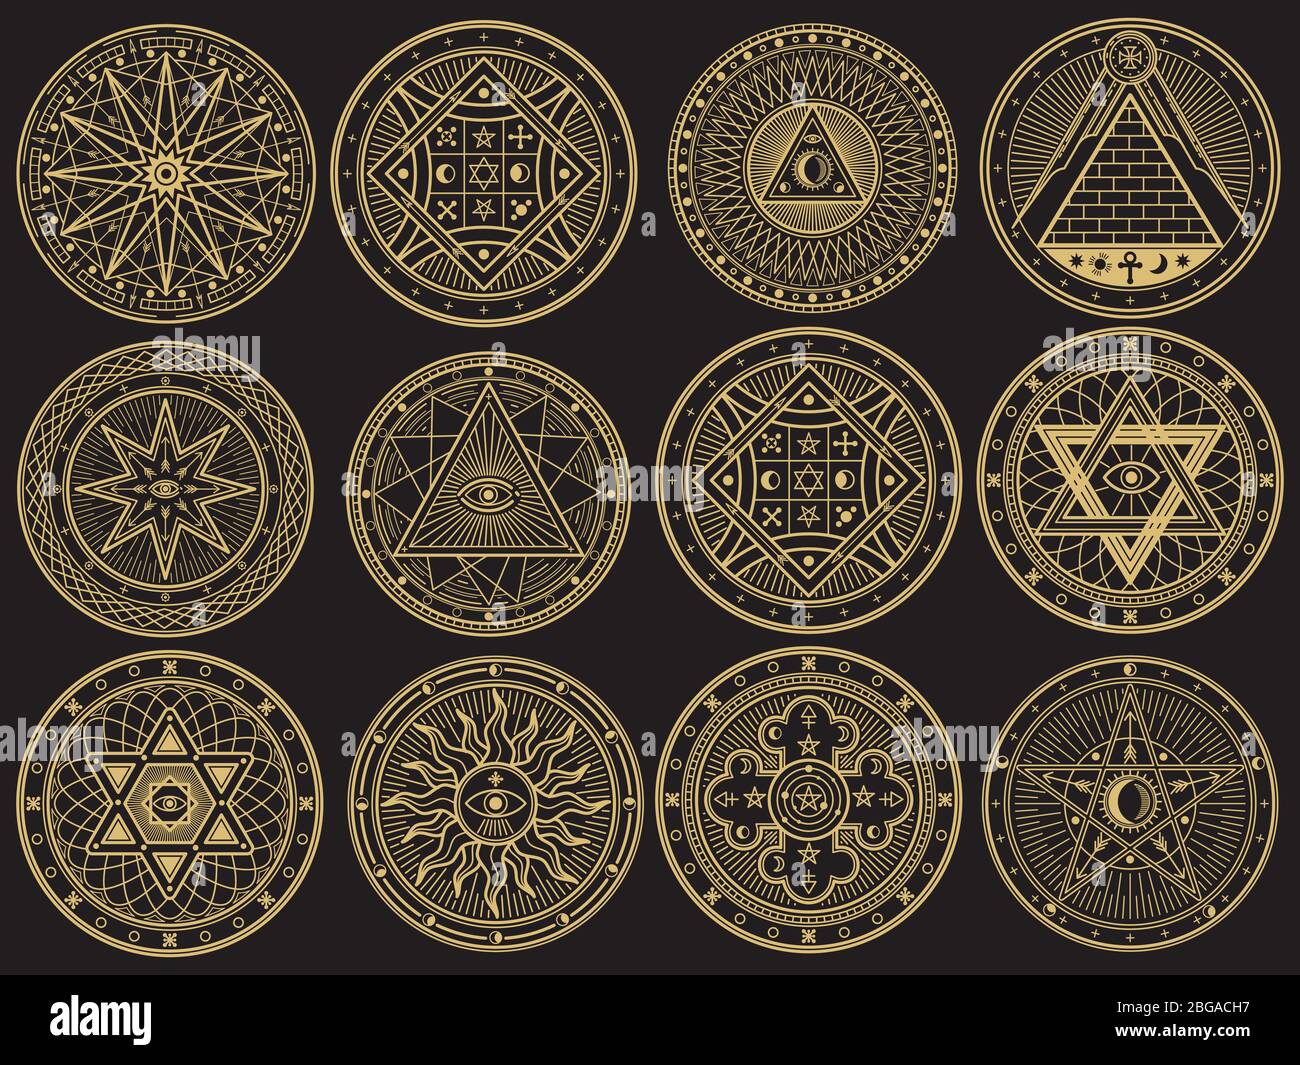 Golden mystery, witchcraft, occult, alchemy, mystical esoteric symbols. Witchcraft mystery emblem collection, magic religion tattoo. Vector illustration Stock Vector